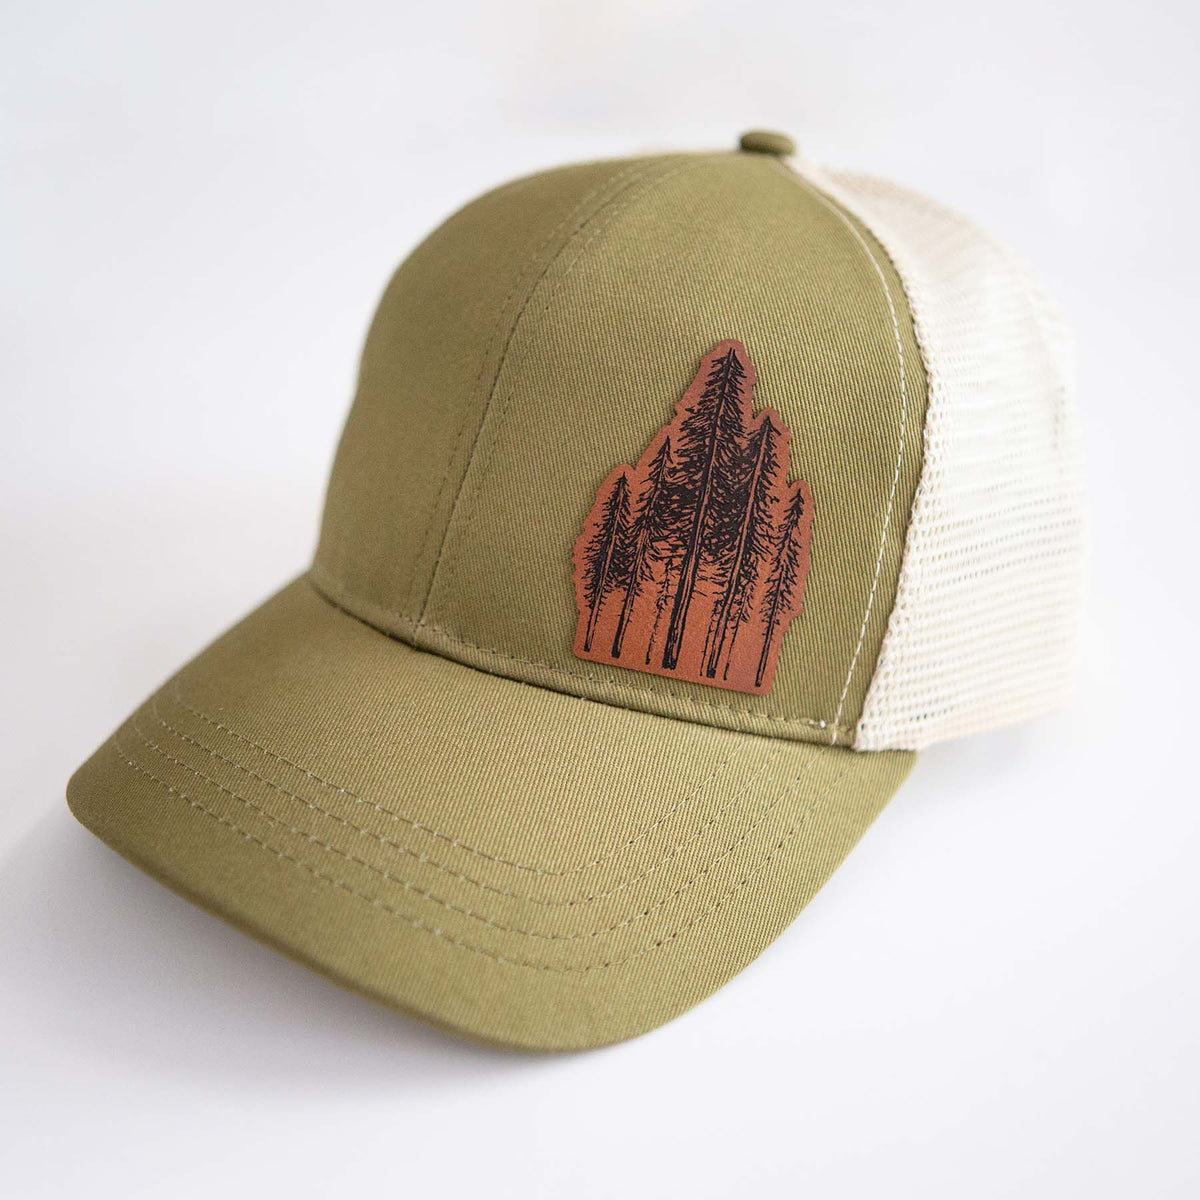 Eco Trucker Hat - Organic and Recycled